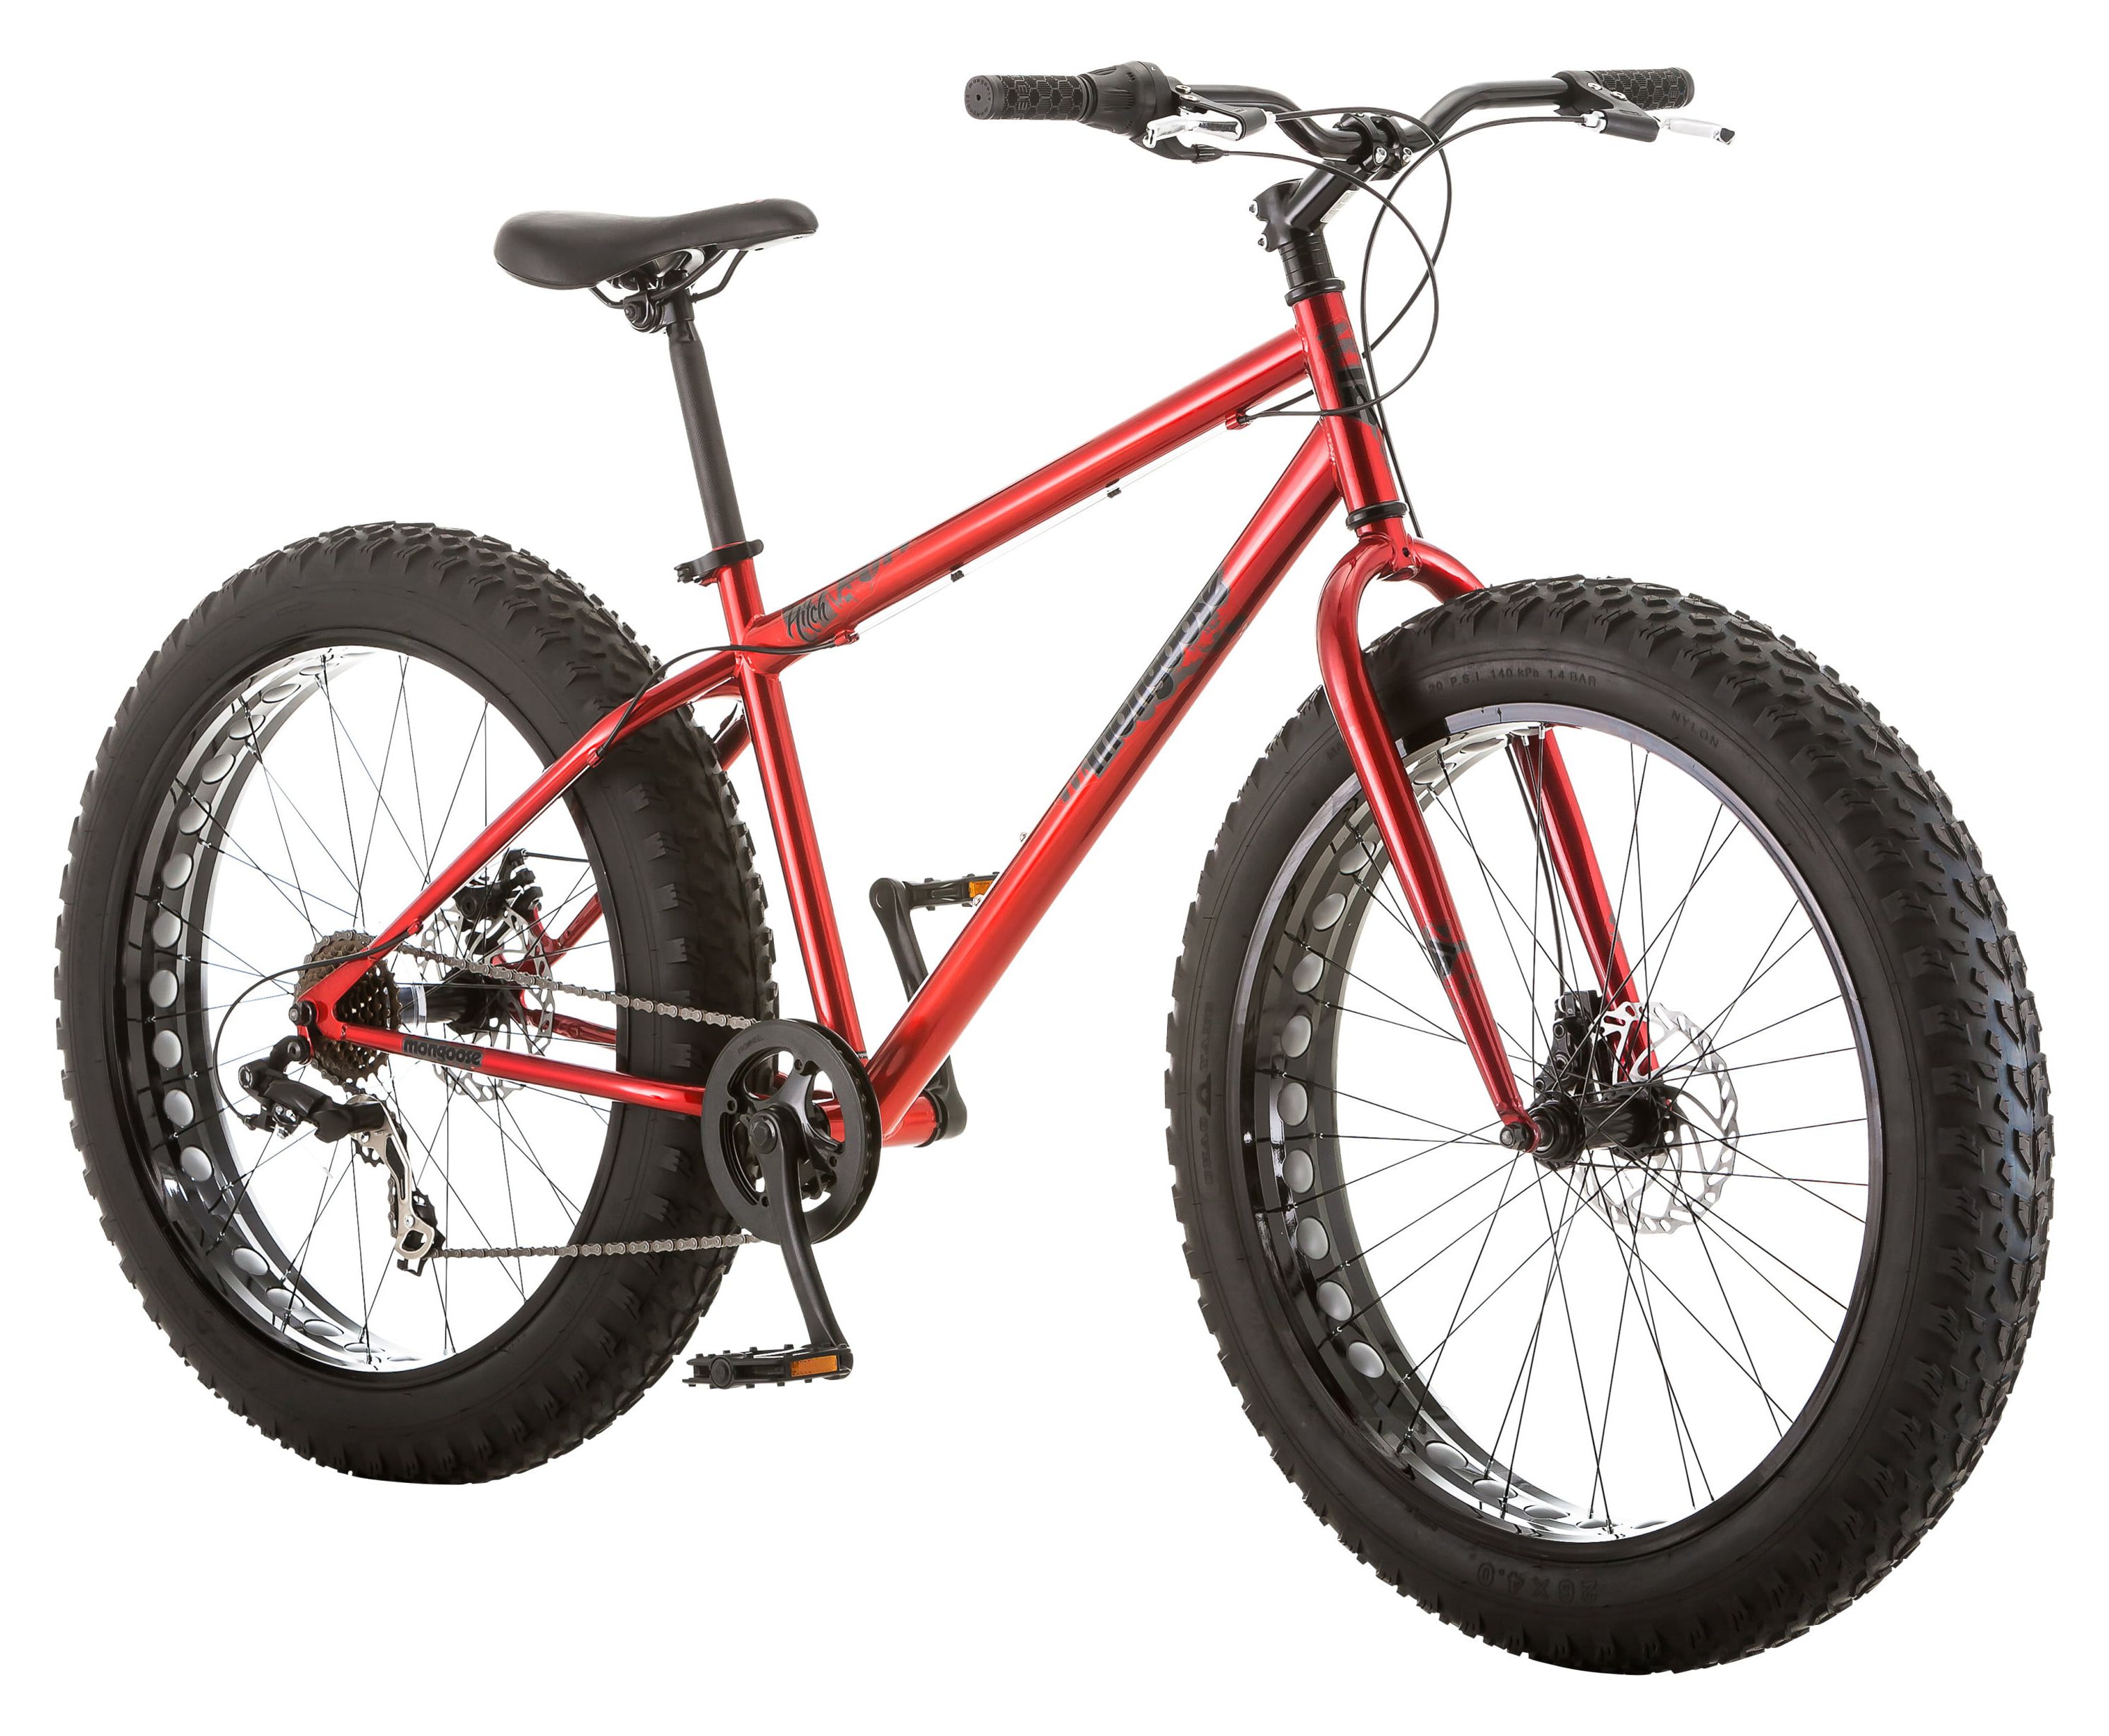 Mongoose Hitch All-Terrain Fat Tire Bike, 26-inch wheels, Men's Style, Red - image 4 of 5